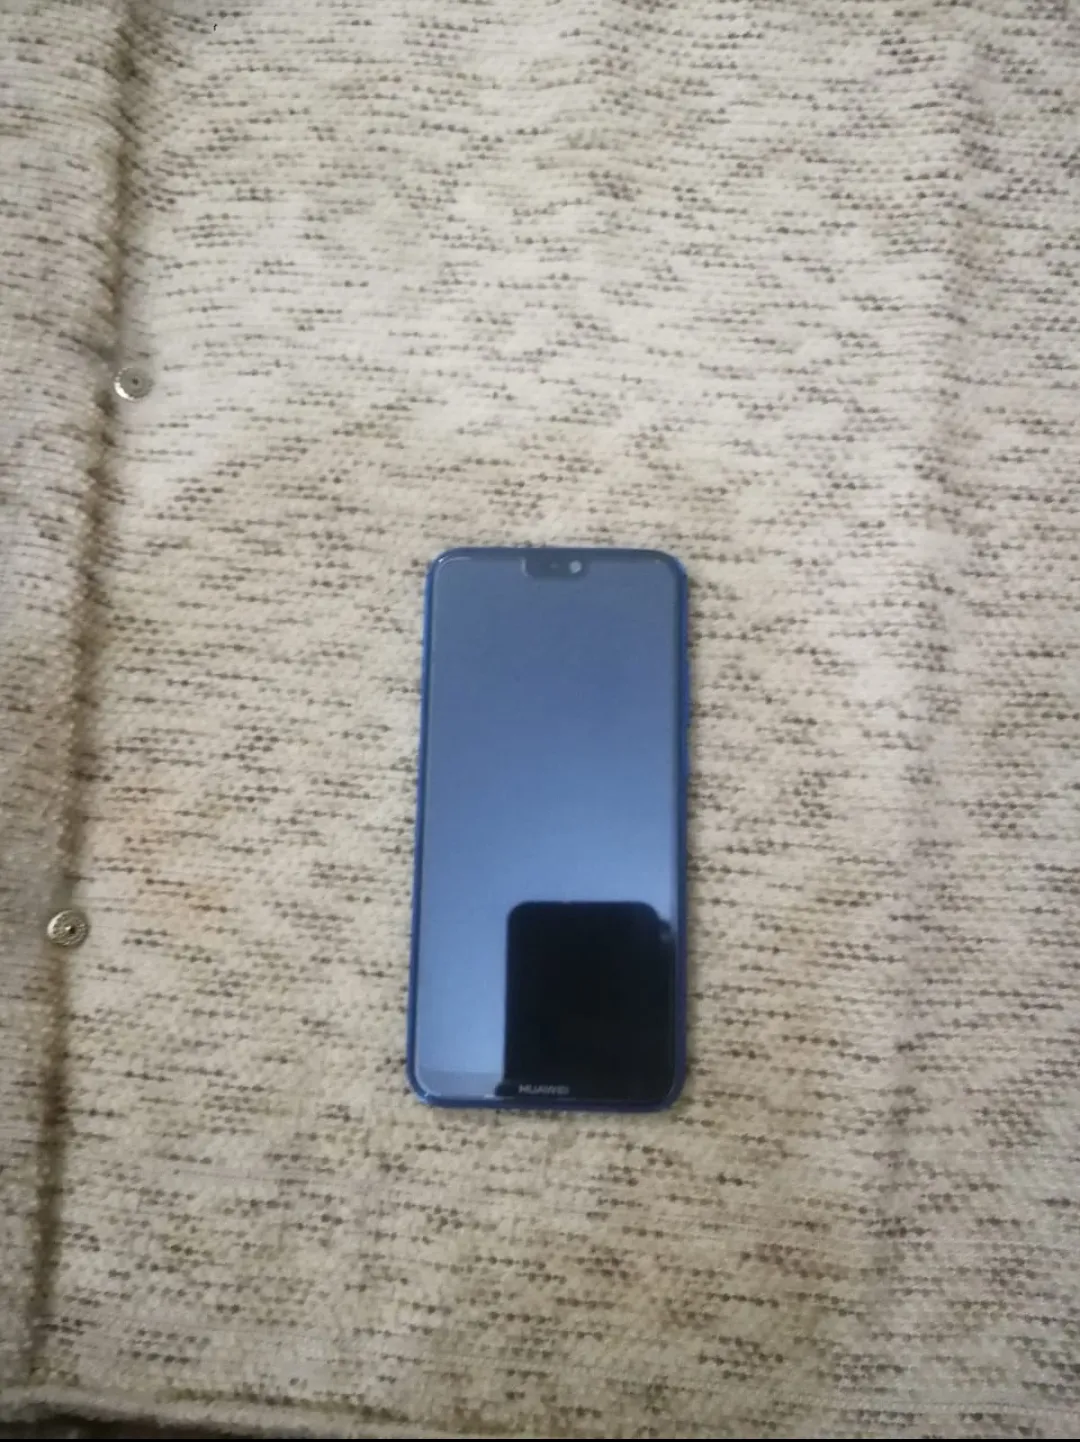 Huawei p20 lite for sale - photo 3